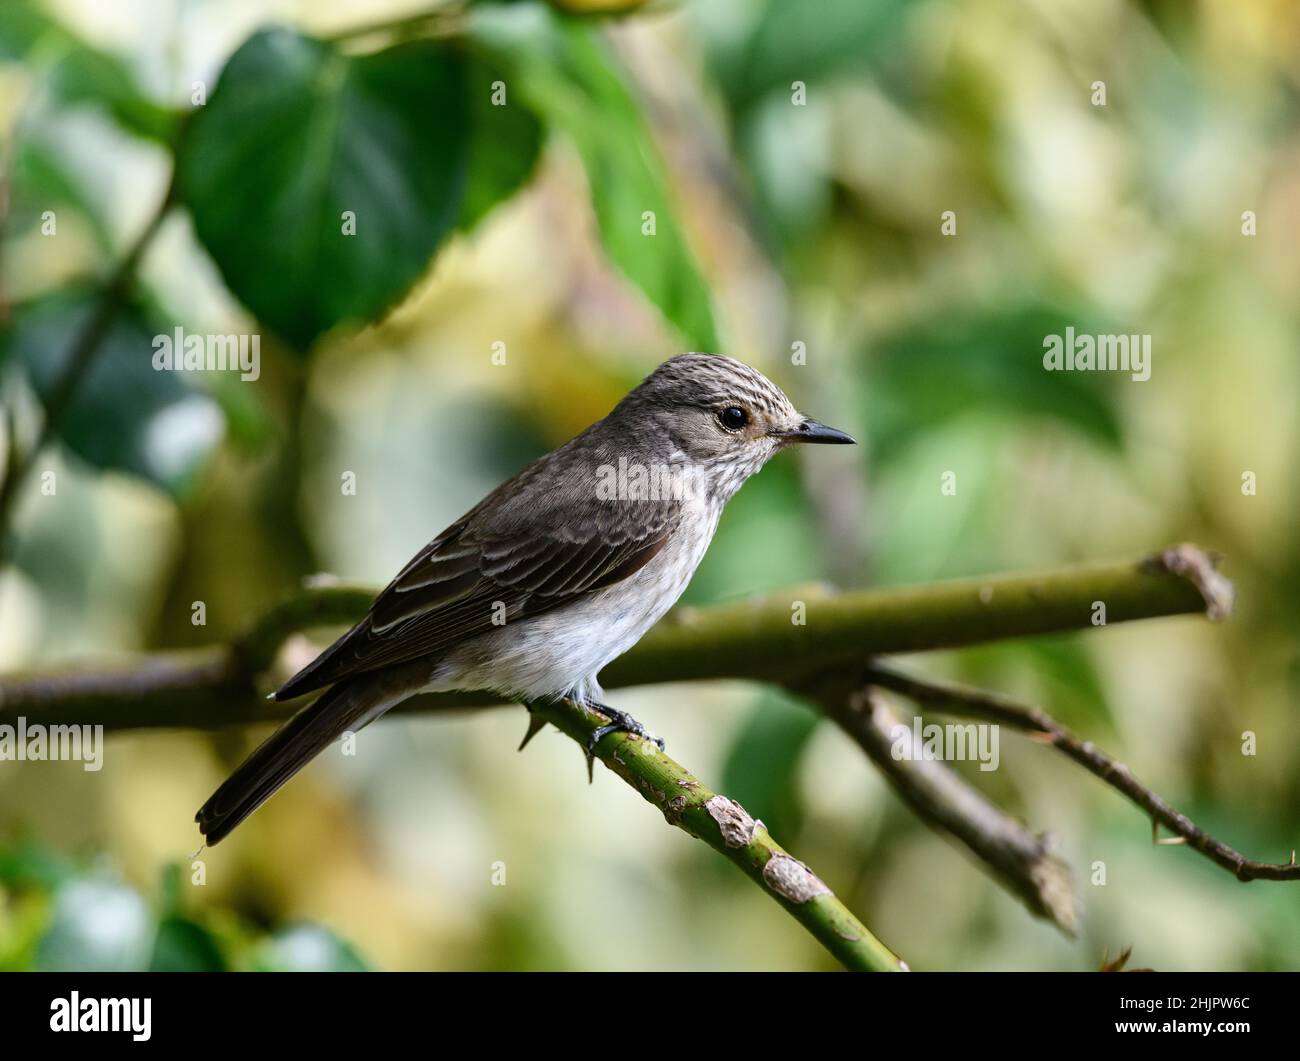 Muscicapidae, commonly known as Old World Flycatcher - British bird - sitting on branch of tree in Shrewsbury, Shropshire, West Midlands Stock Photo